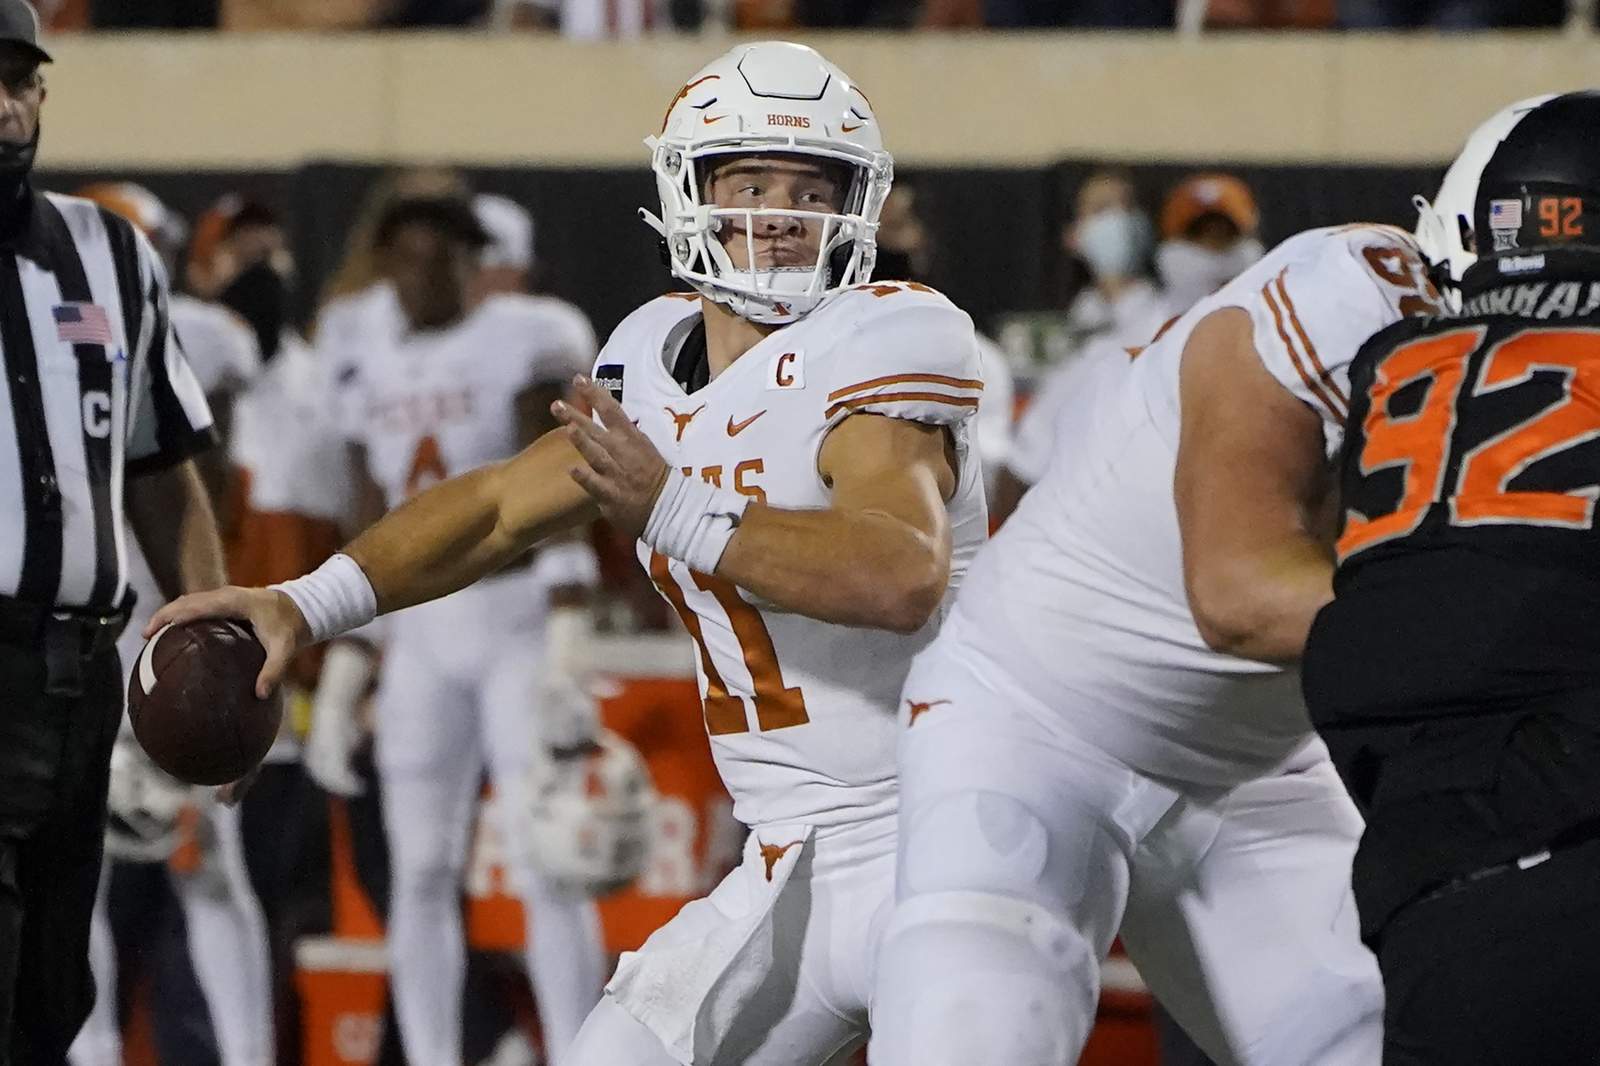 Ehlinger's TD pass helps Texas beat No. 6 Oklahoma St. in OT